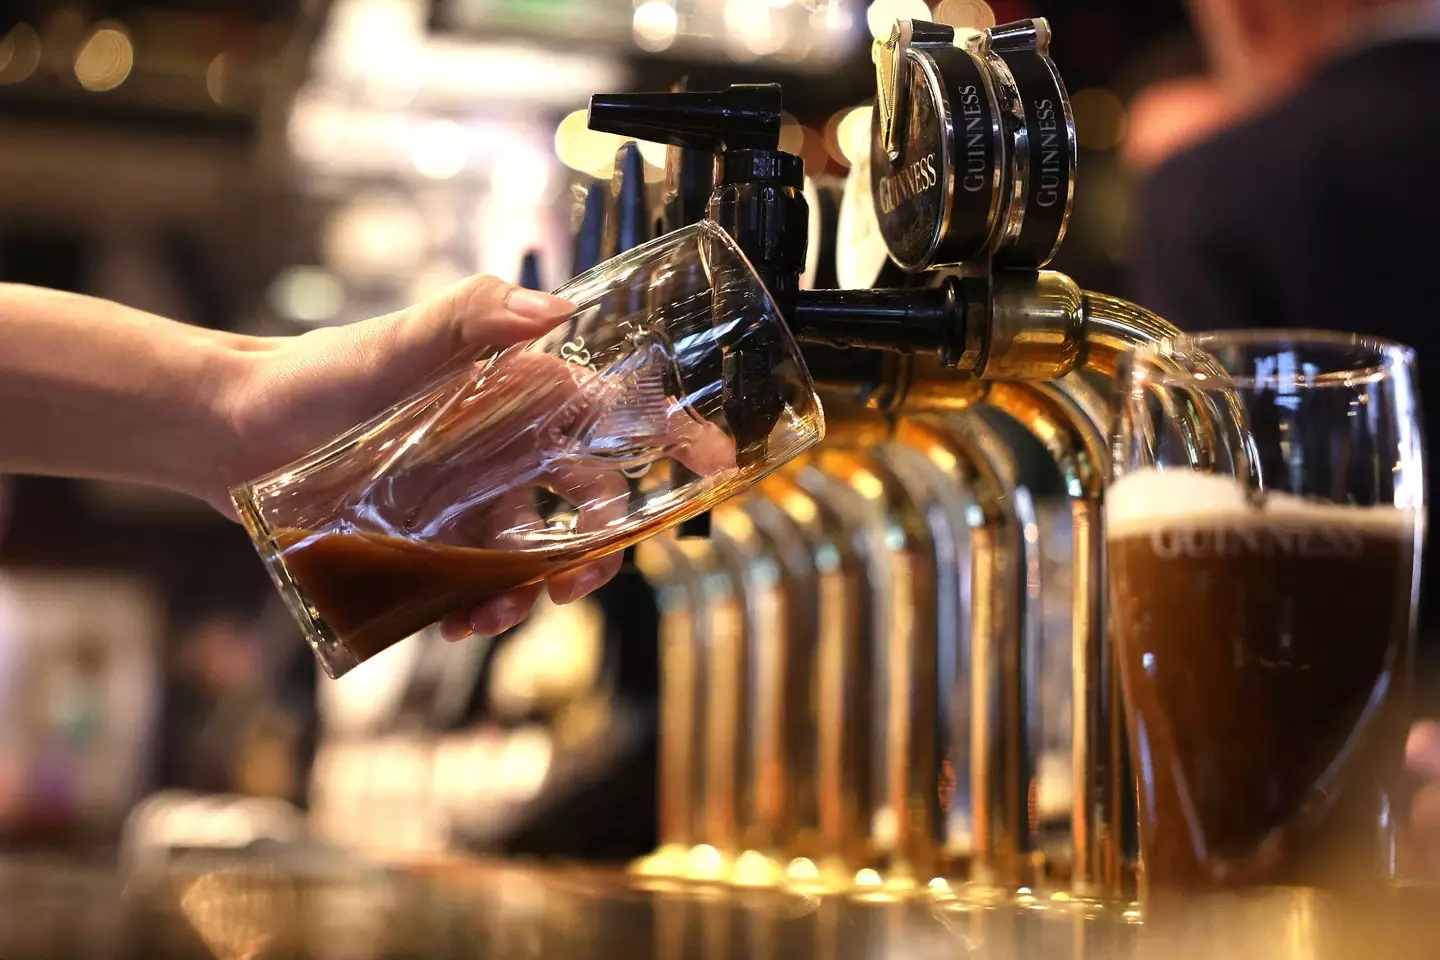 Jobs reportedly used the 'beer test' when interviewing candidates.